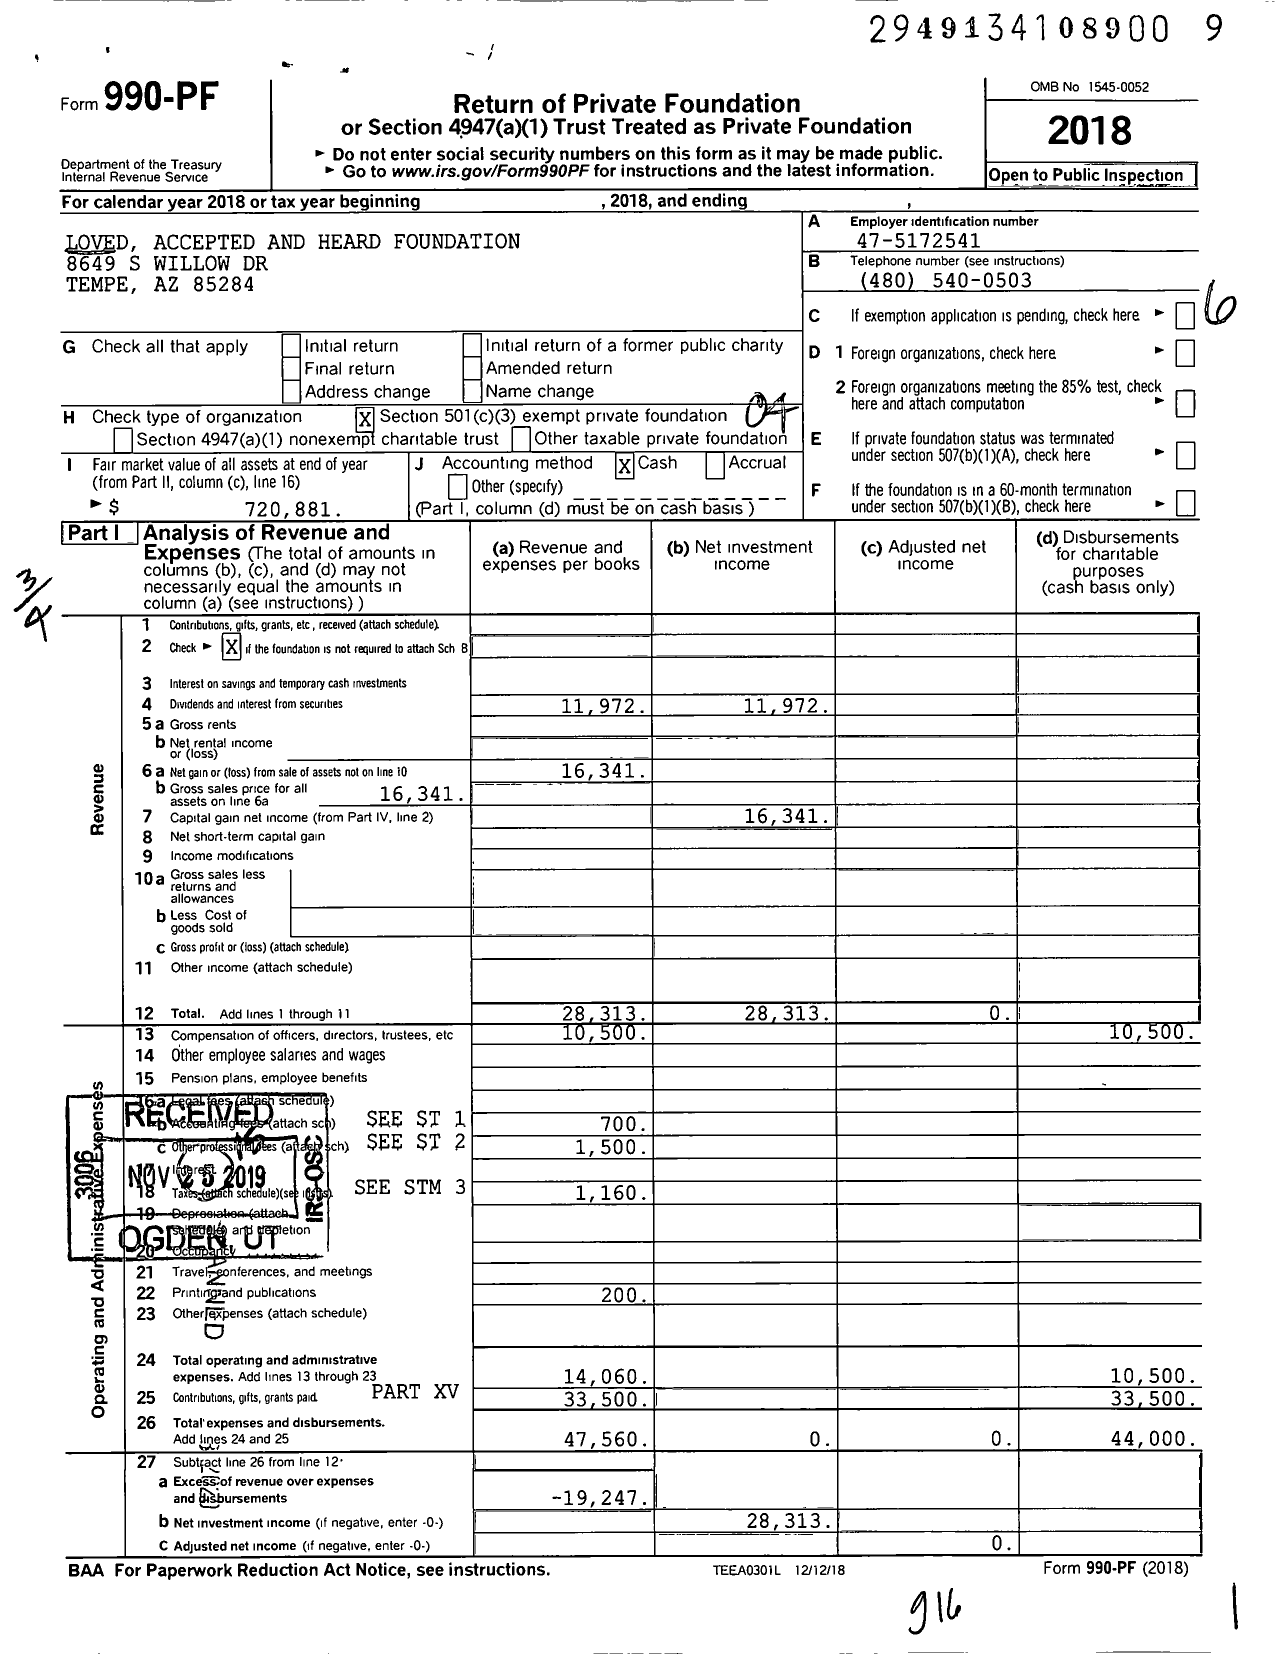 Image of first page of 2018 Form 990PF for Loved Accepted and Heard Foundation